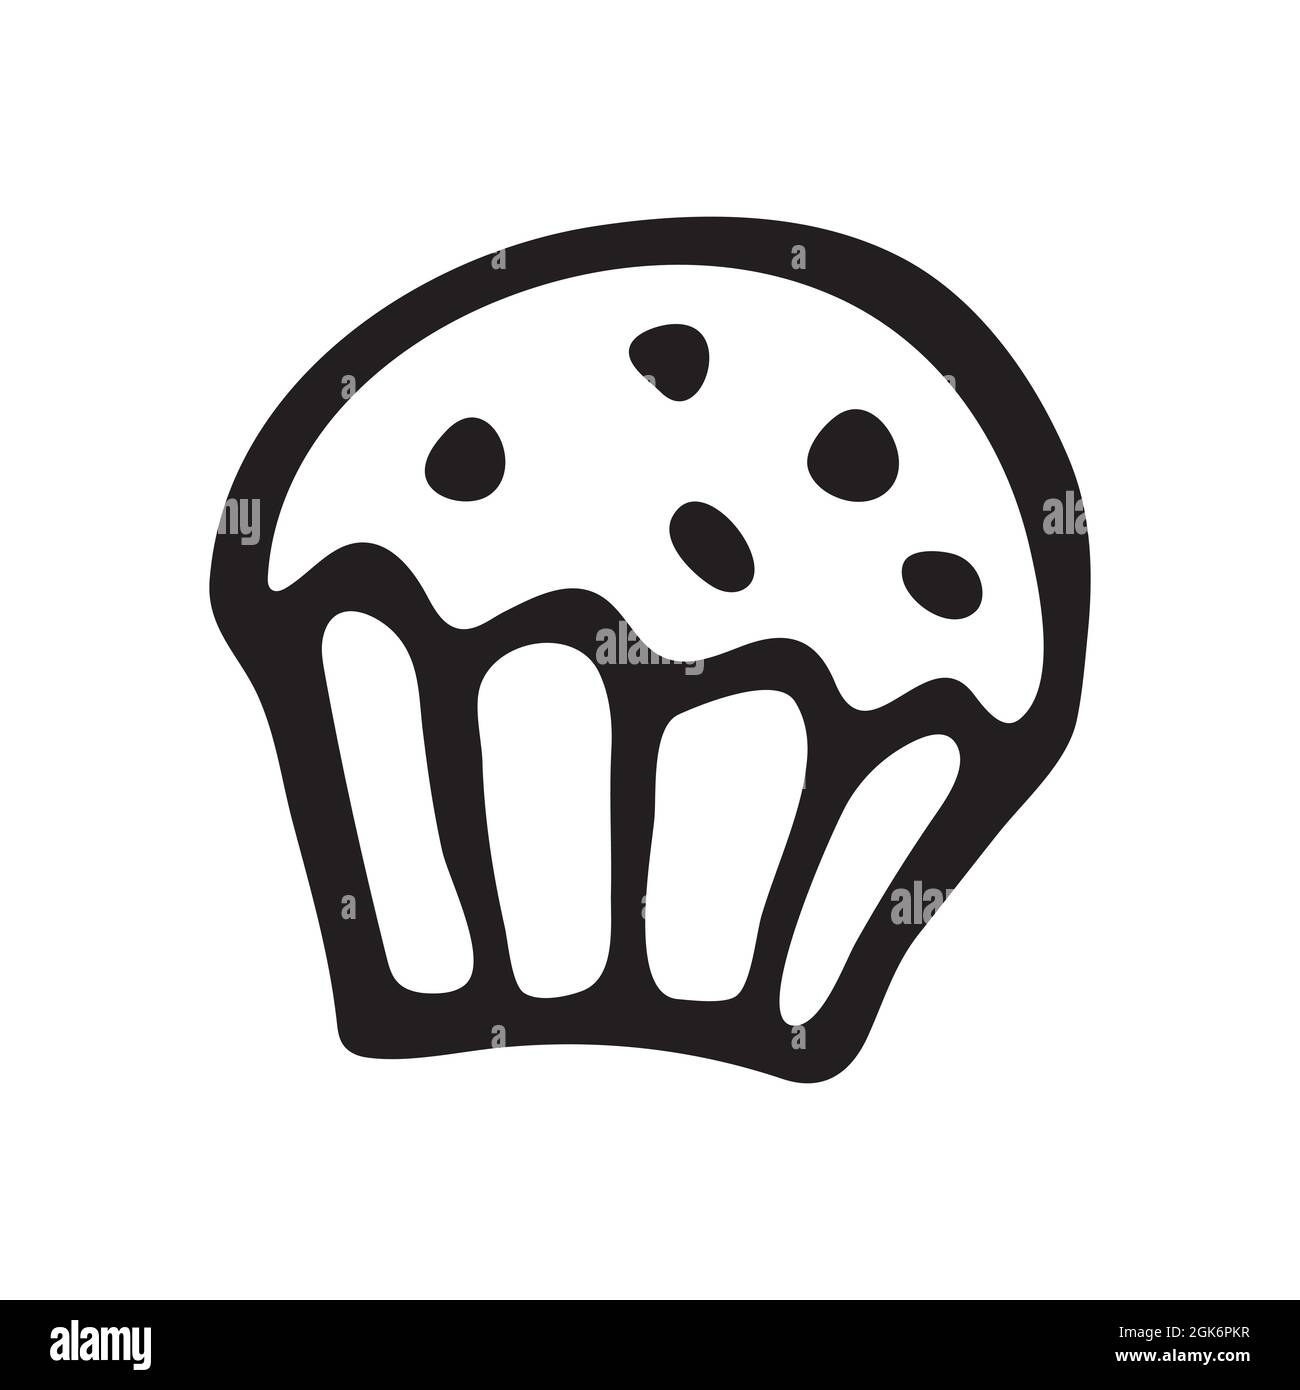 Hand drawn doodle style muffin in vector. Isolated illustration on white background. For interior design, wallpaper, packaging, poster Stock Vector